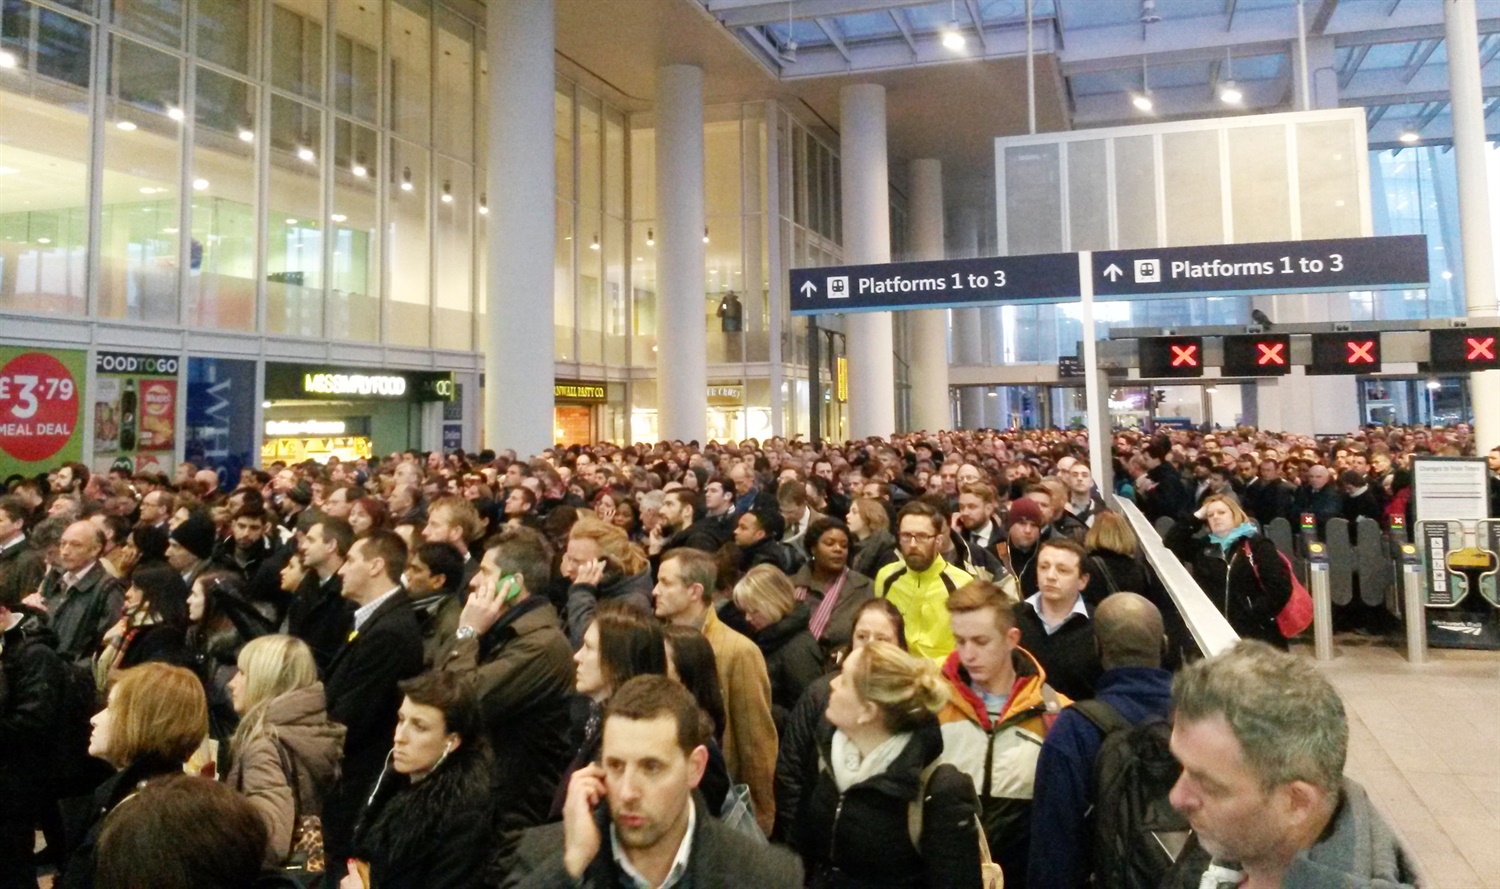 Urgent action called for after crowd chaos at London Bridge